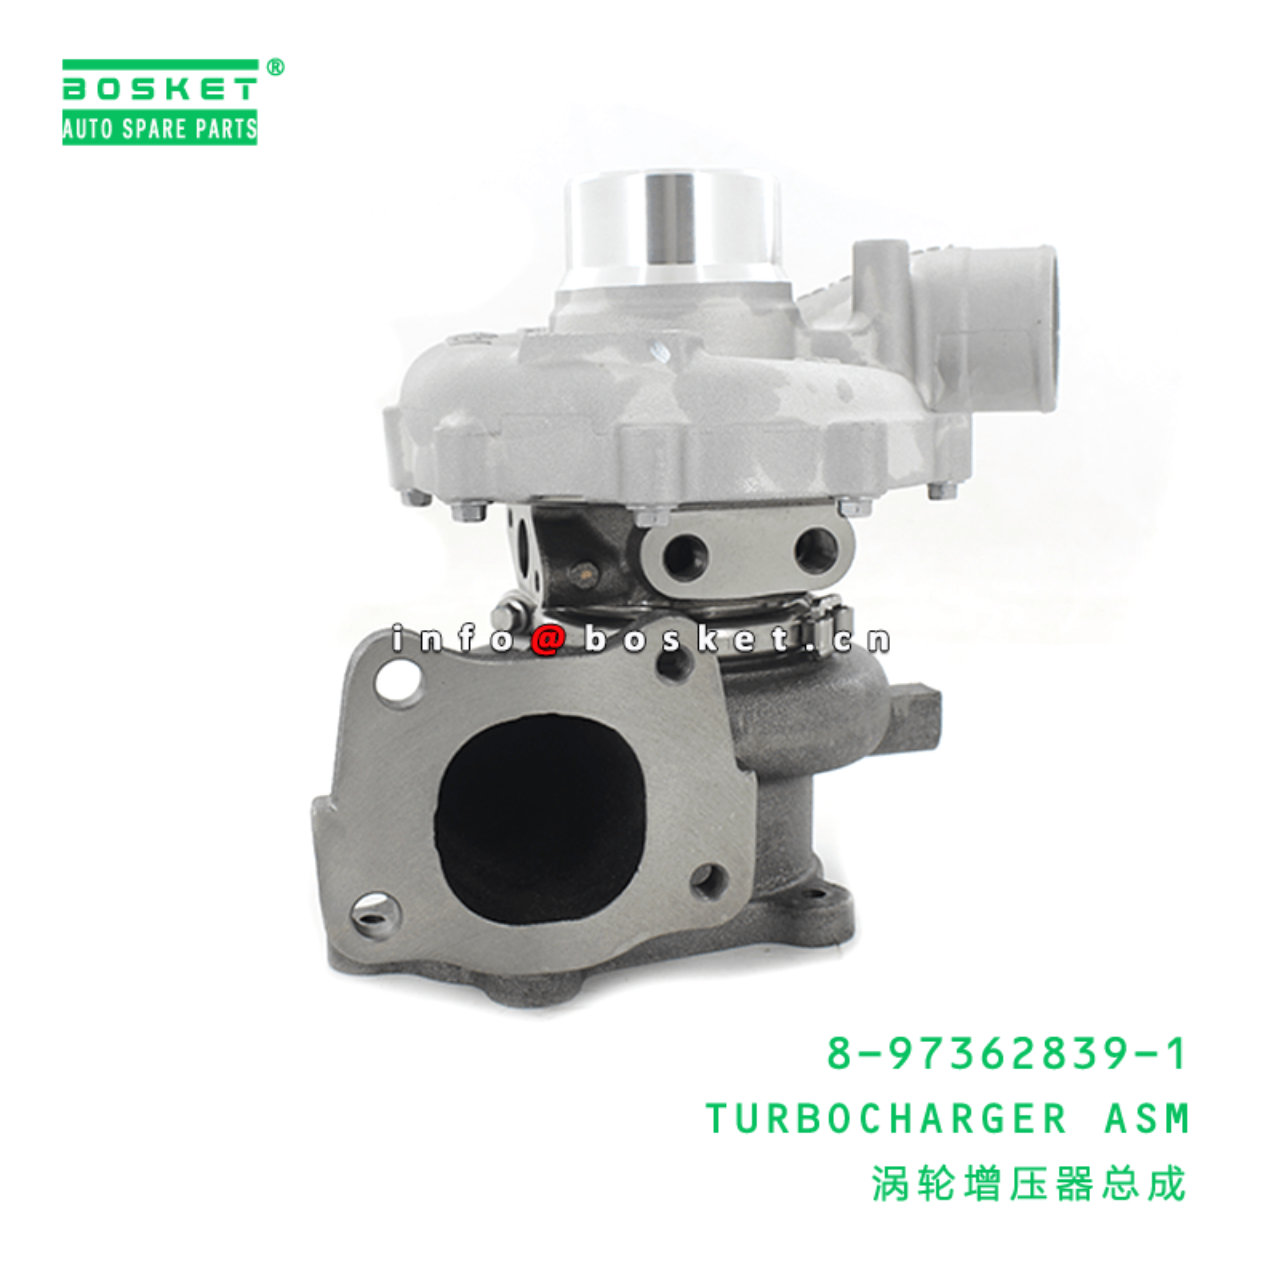  8-97362839-1 Turbocharger Assembly 8973628391 Suitable for ISUZU XD 4HK1